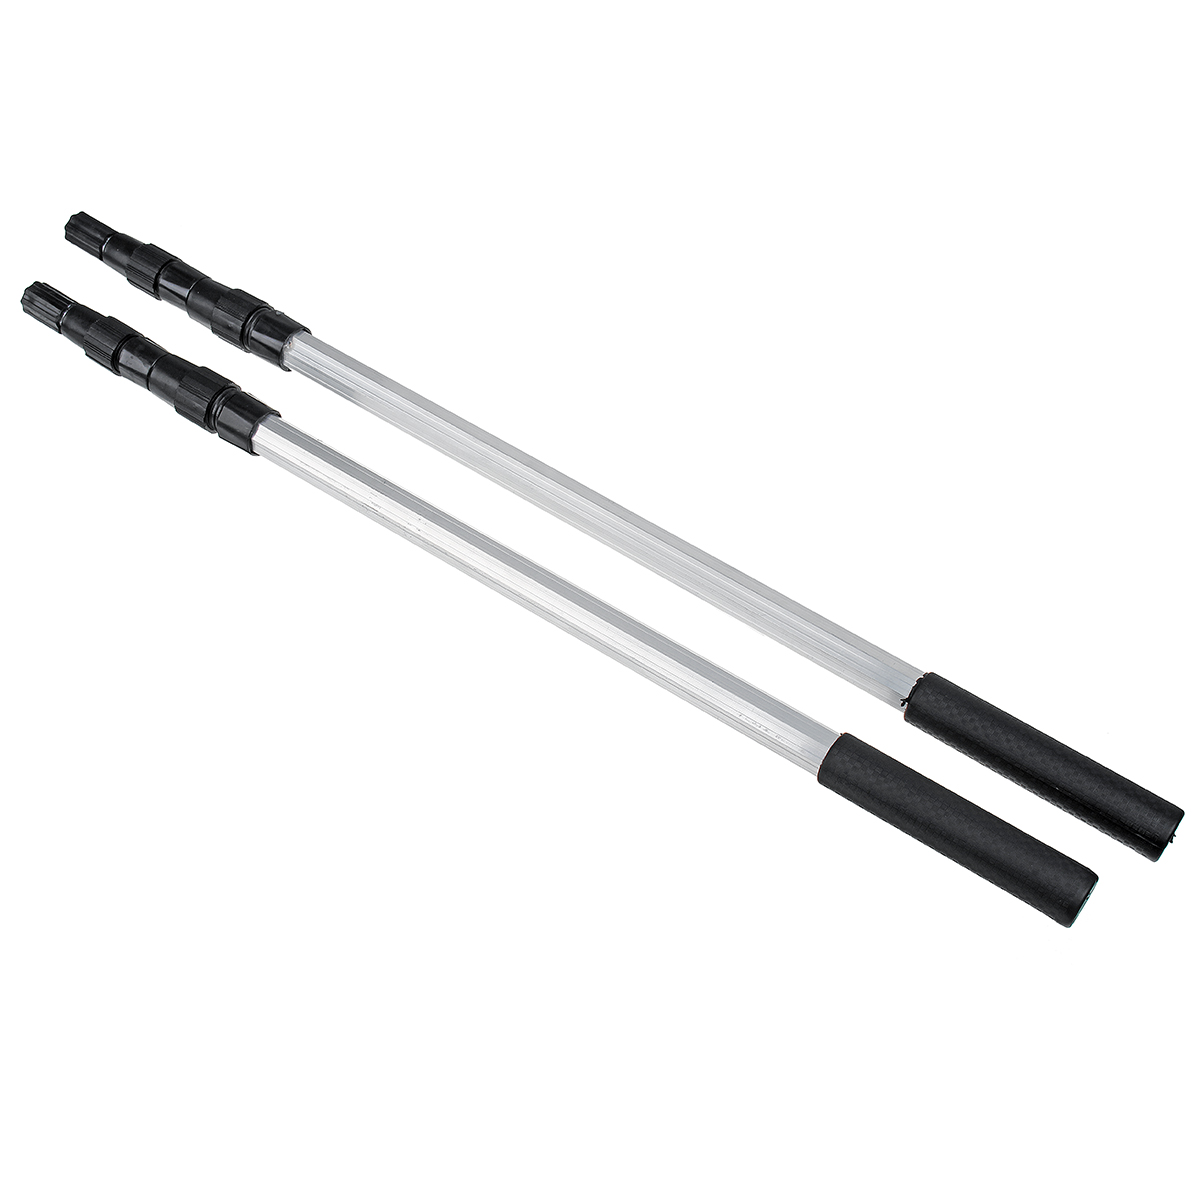 Telescopic-Fishing-Fish-Landing-Collapsible-Foldable-Pole-Handle-Removable-Alloy-1693435-7